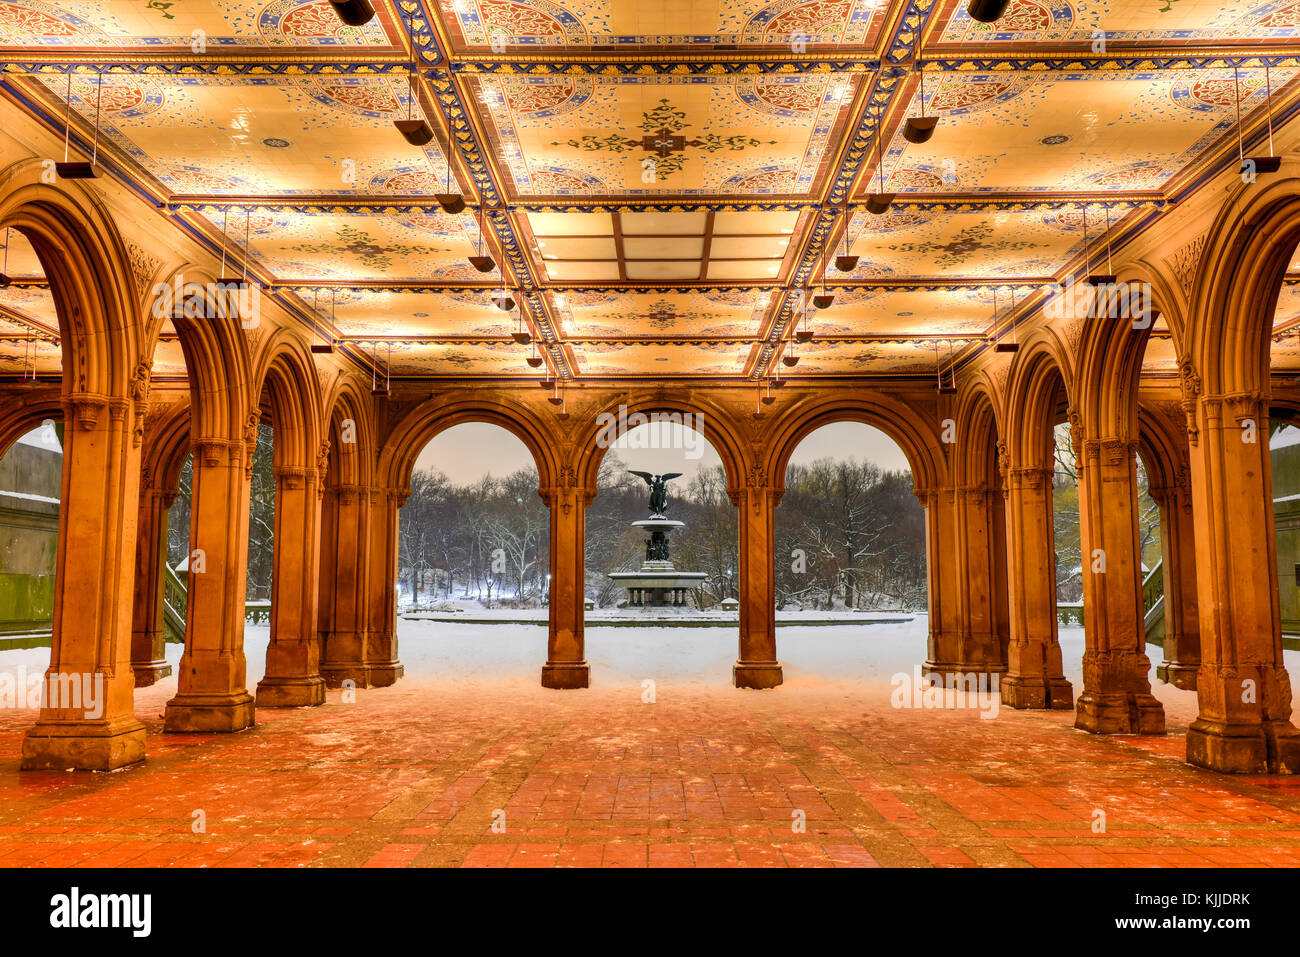 Central Park on X: Did you know? Bethesda Terrace Arcade's ceiling  features almost 16,000 elaborately patterned encaustic tiles, handmade by  England's renowned Minton and Company.  / X